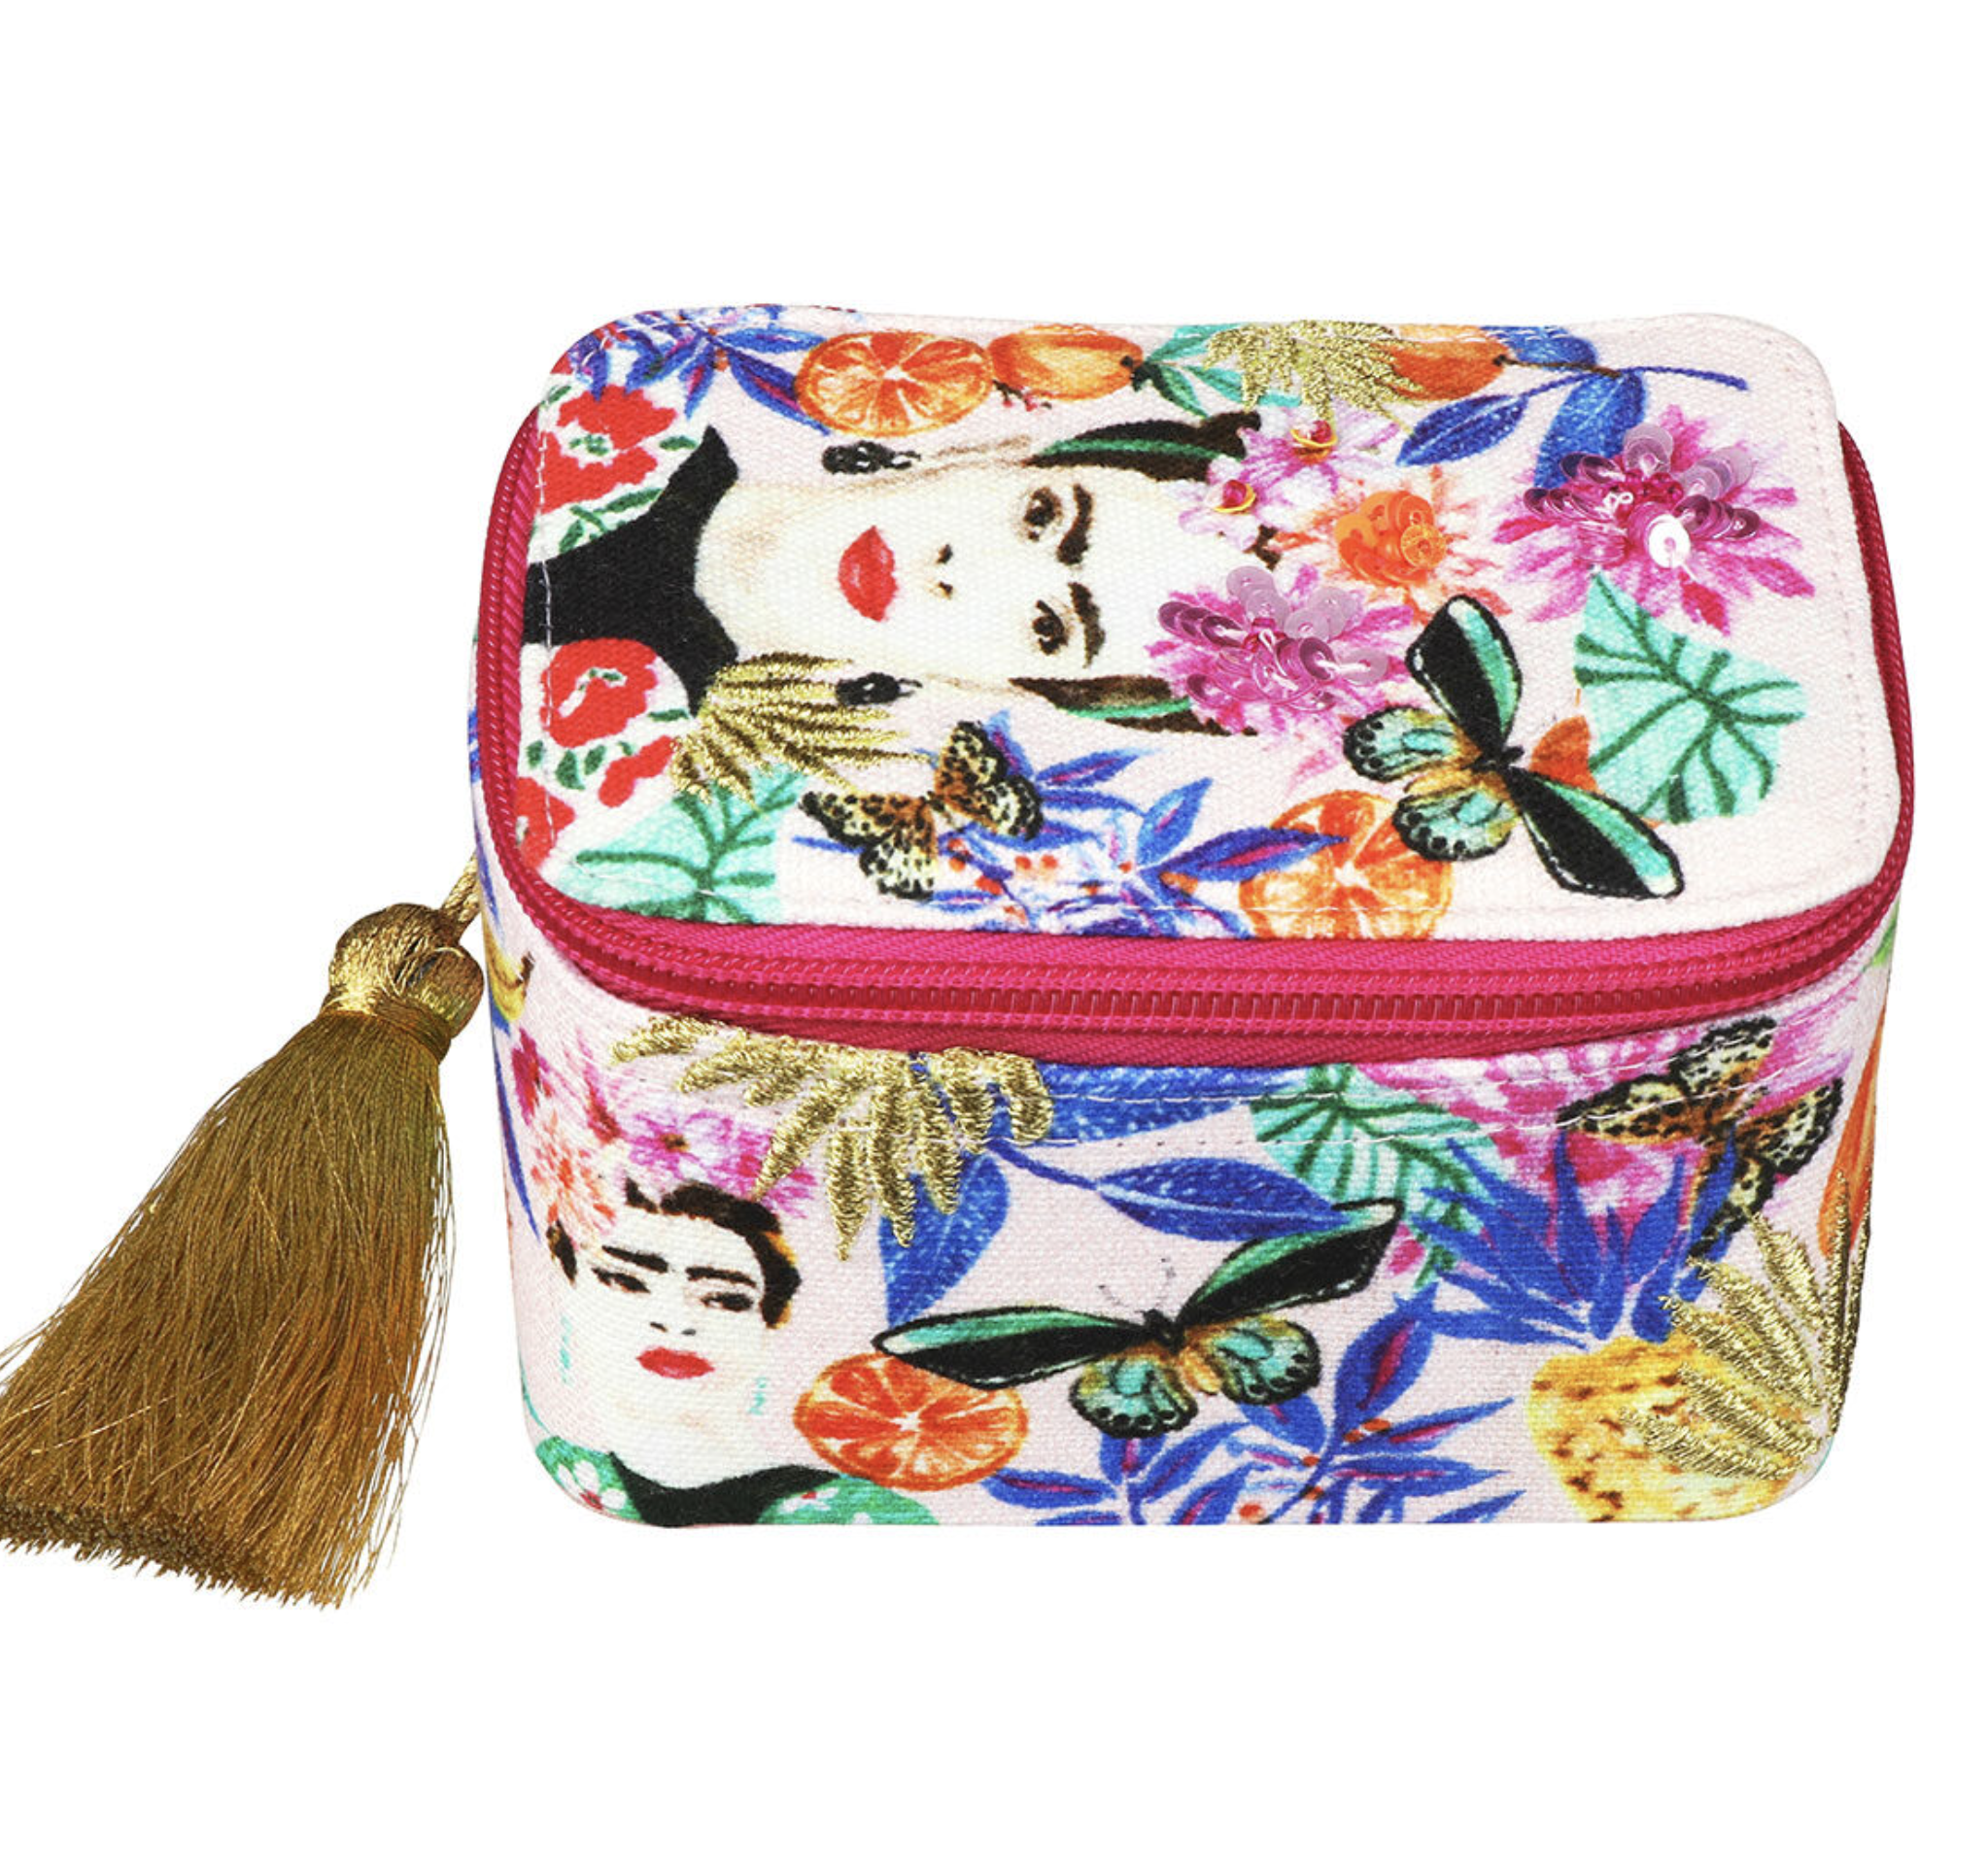 Disaster Designs Frida Khalo Jewelled Embroidered Jewellery case